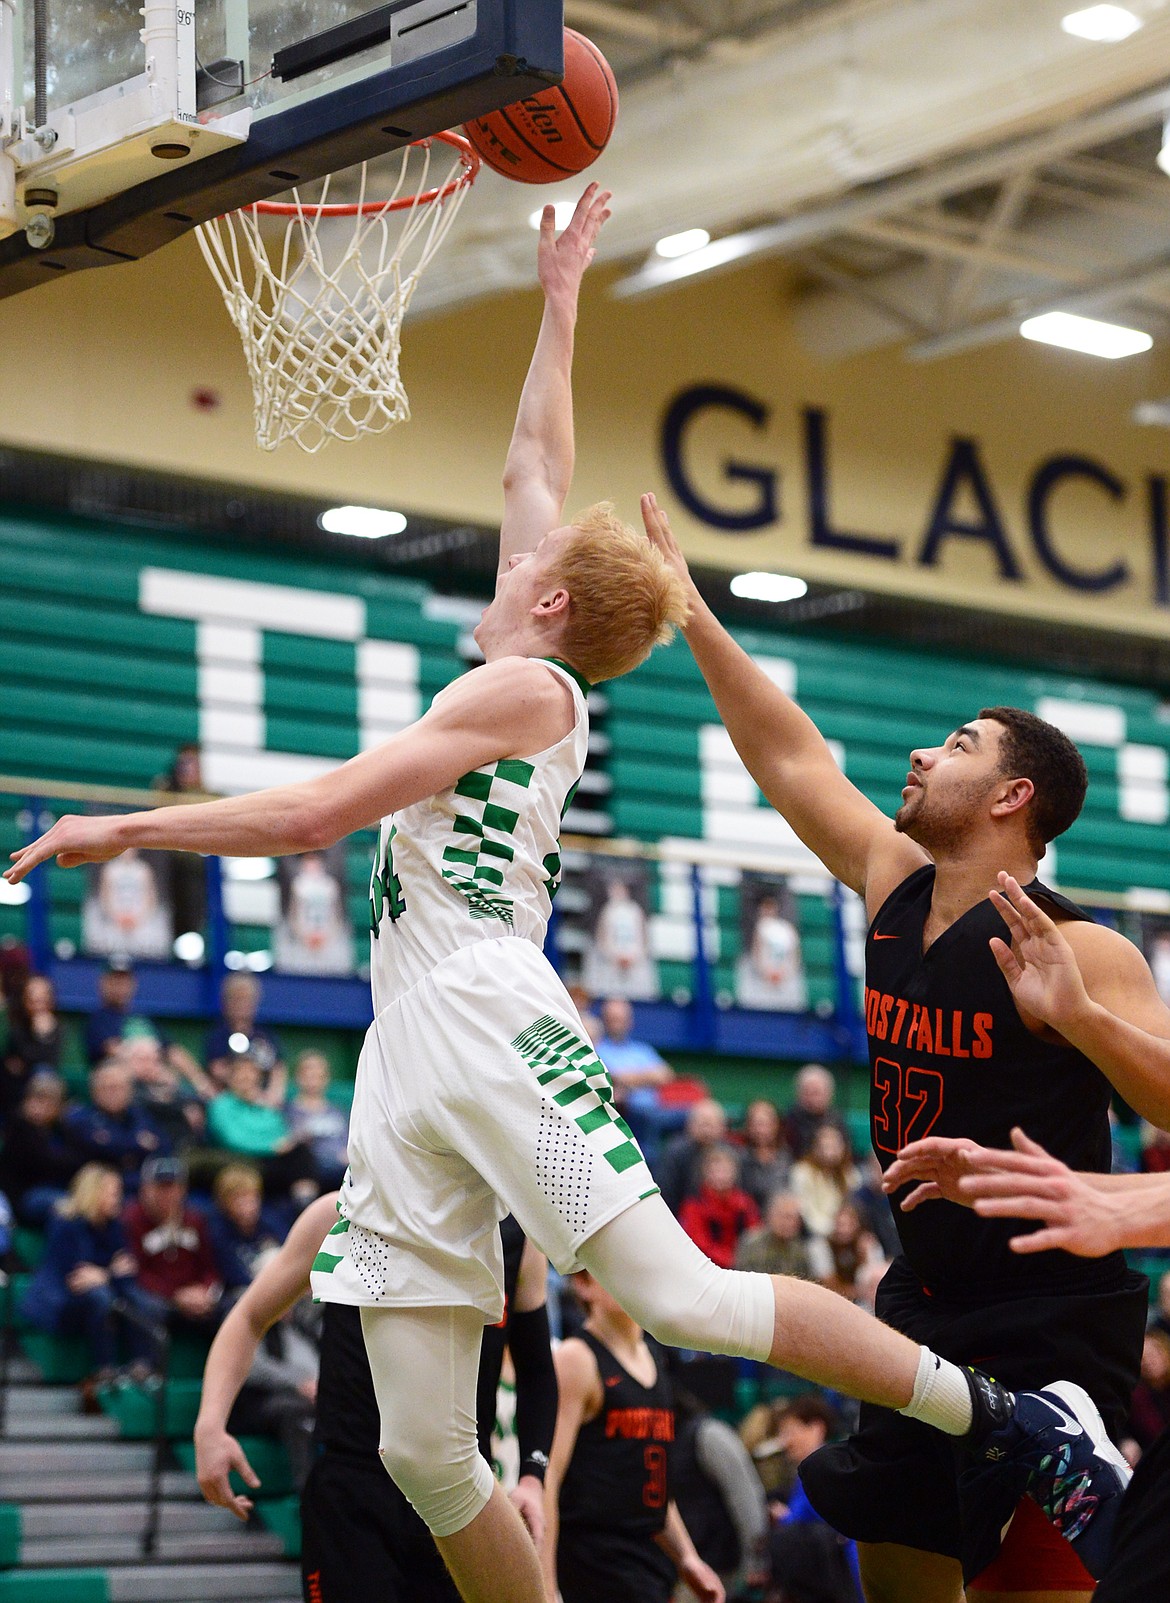 Glacier's Bret Michaels (34) drives to the basket past Post Falls' Terrell Mitchell at Glacier High School on Friday. (Casey Kreider/Daily Inter Lake)